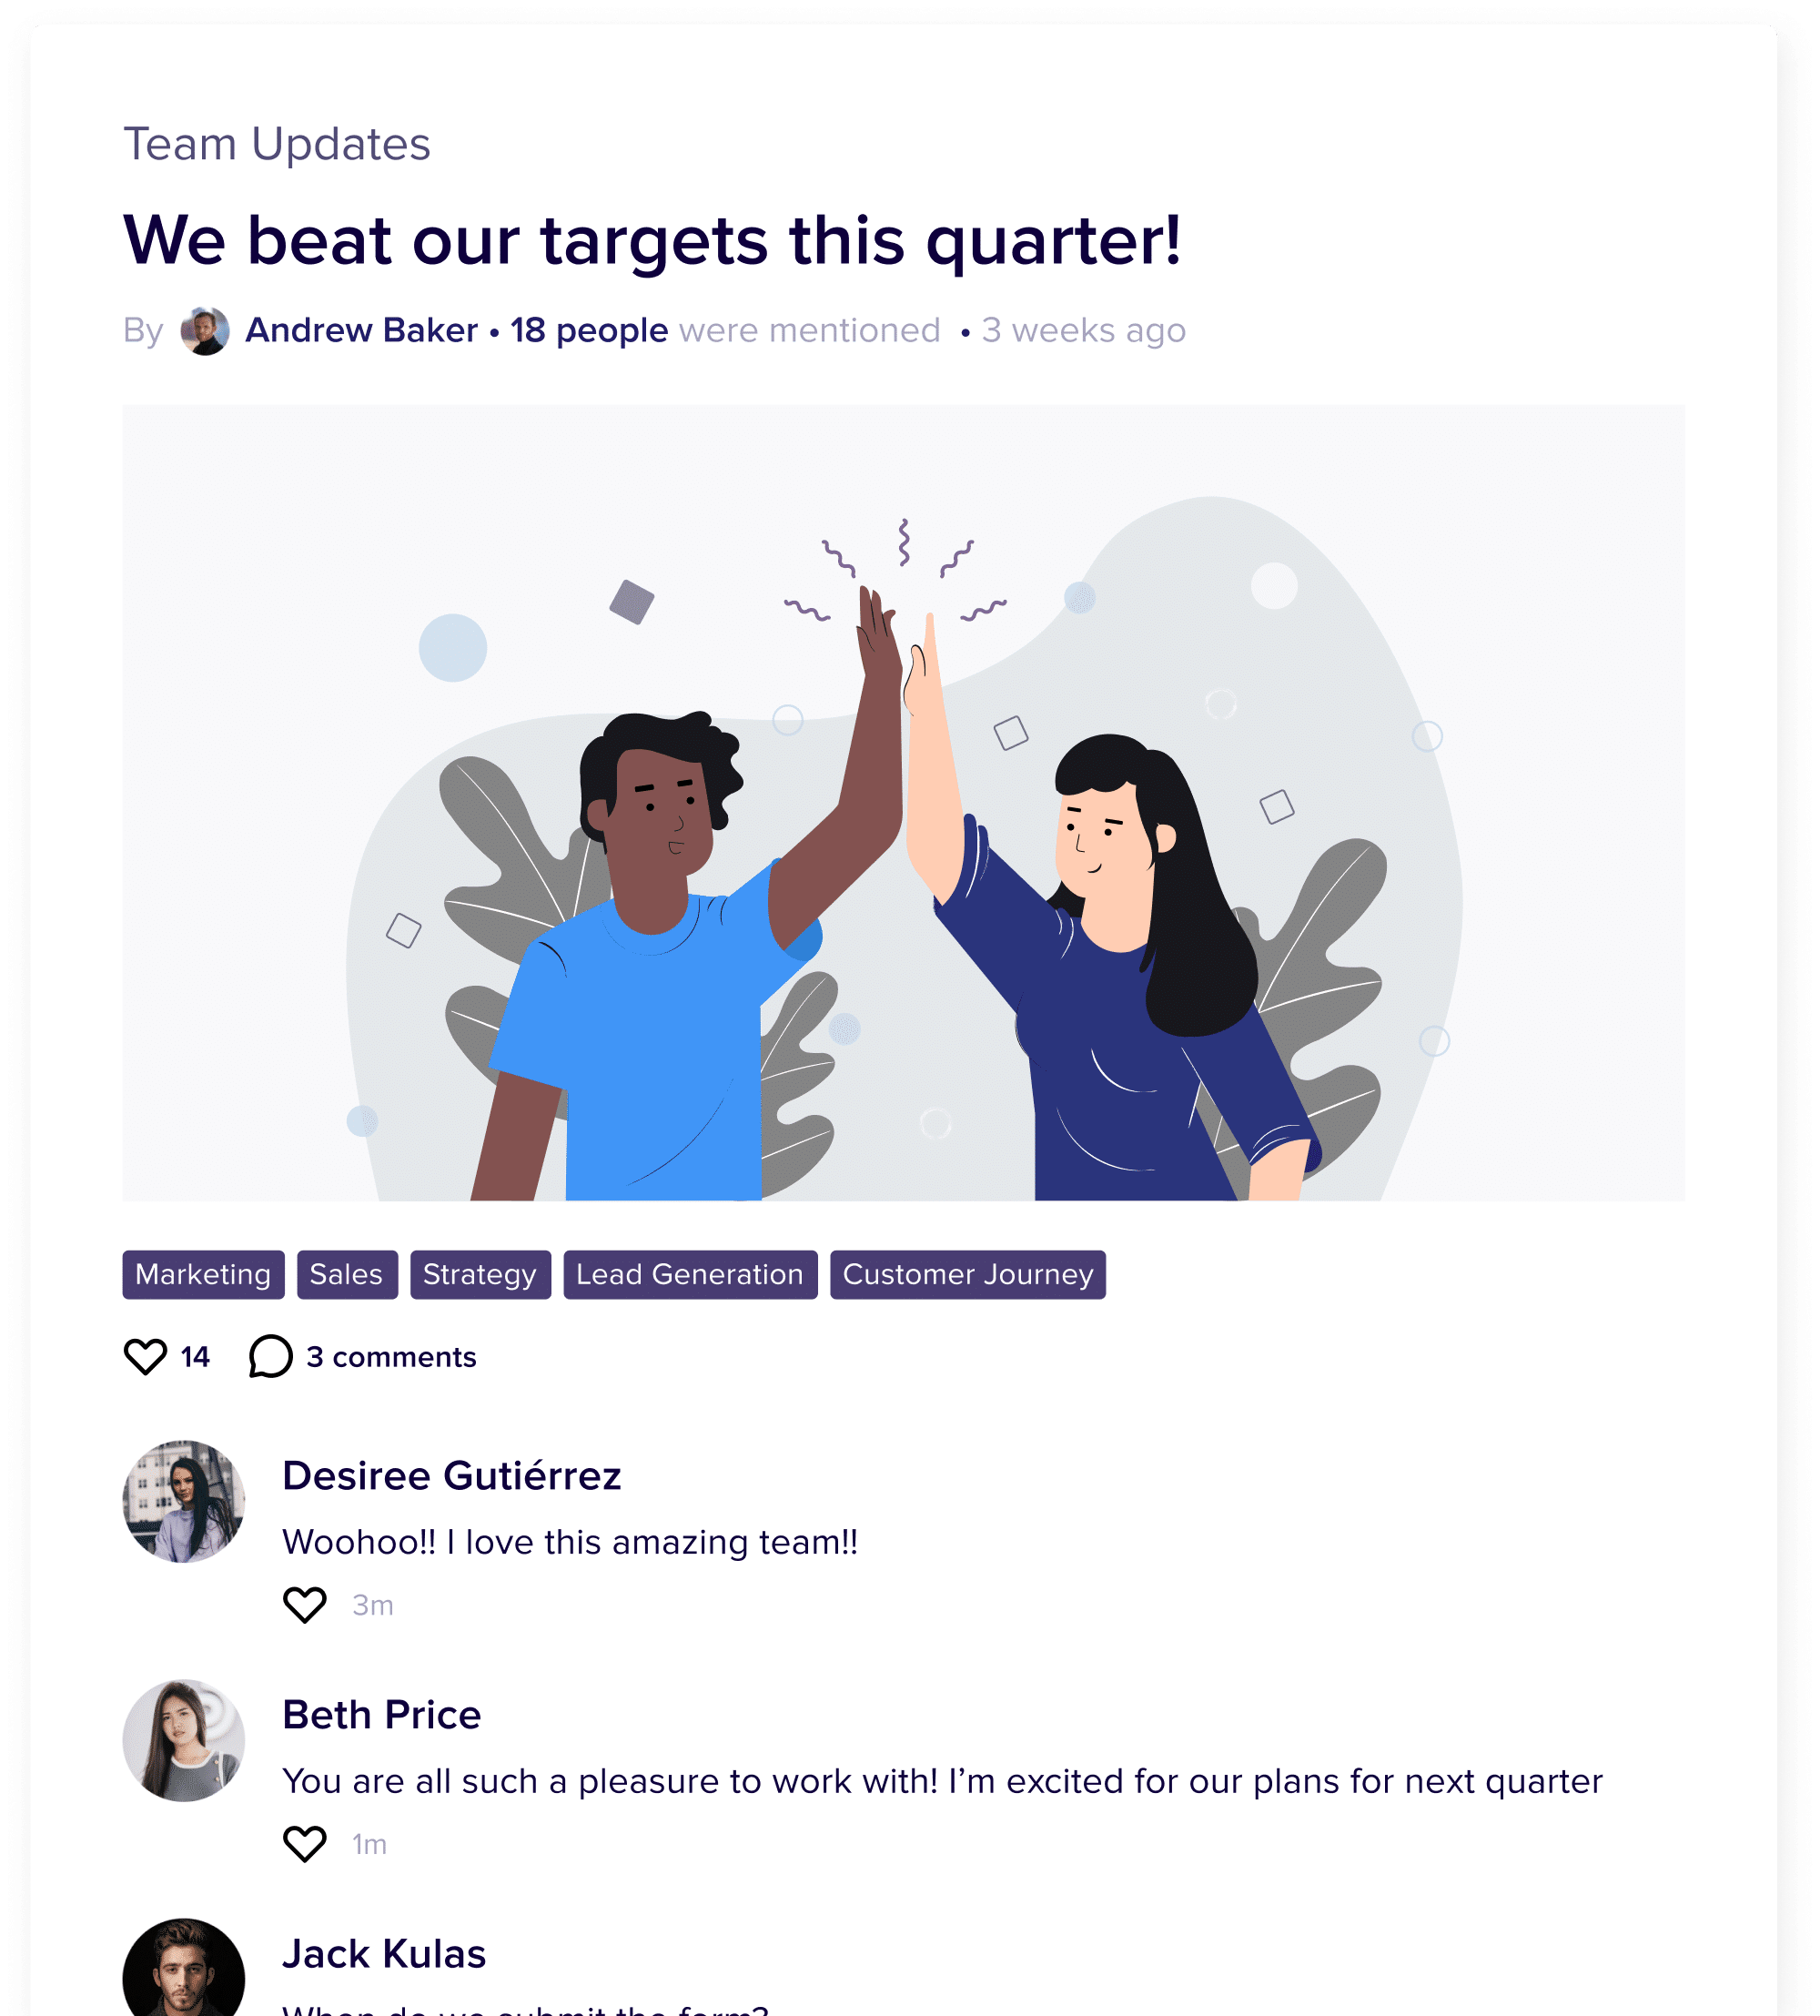 Recognize great work and celebrate milestones to build company culture. Improve your Intranet culture to make employees stay connected.